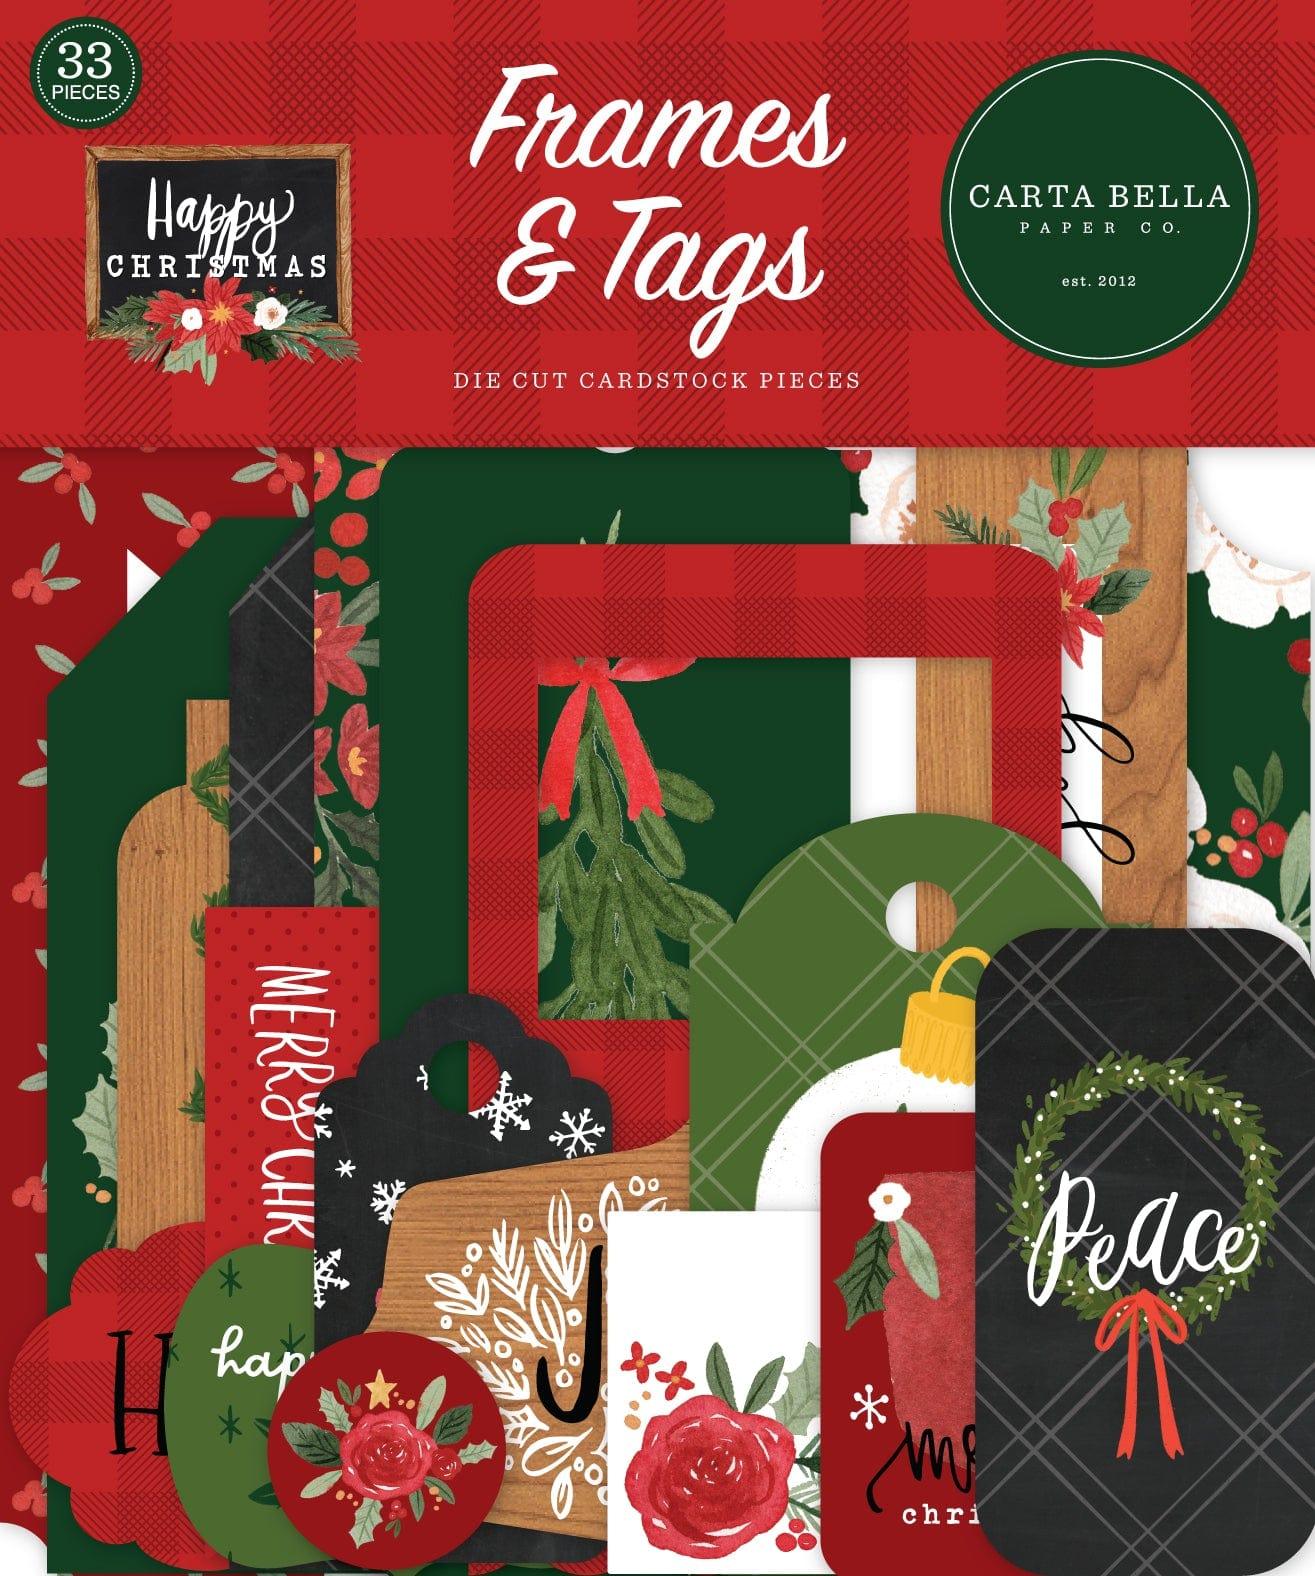 Happy Christmas Collection 5 x 5 Scrapbook Tags & Frames Die Cuts by Carta Bella - Scrapbook Supply Companies